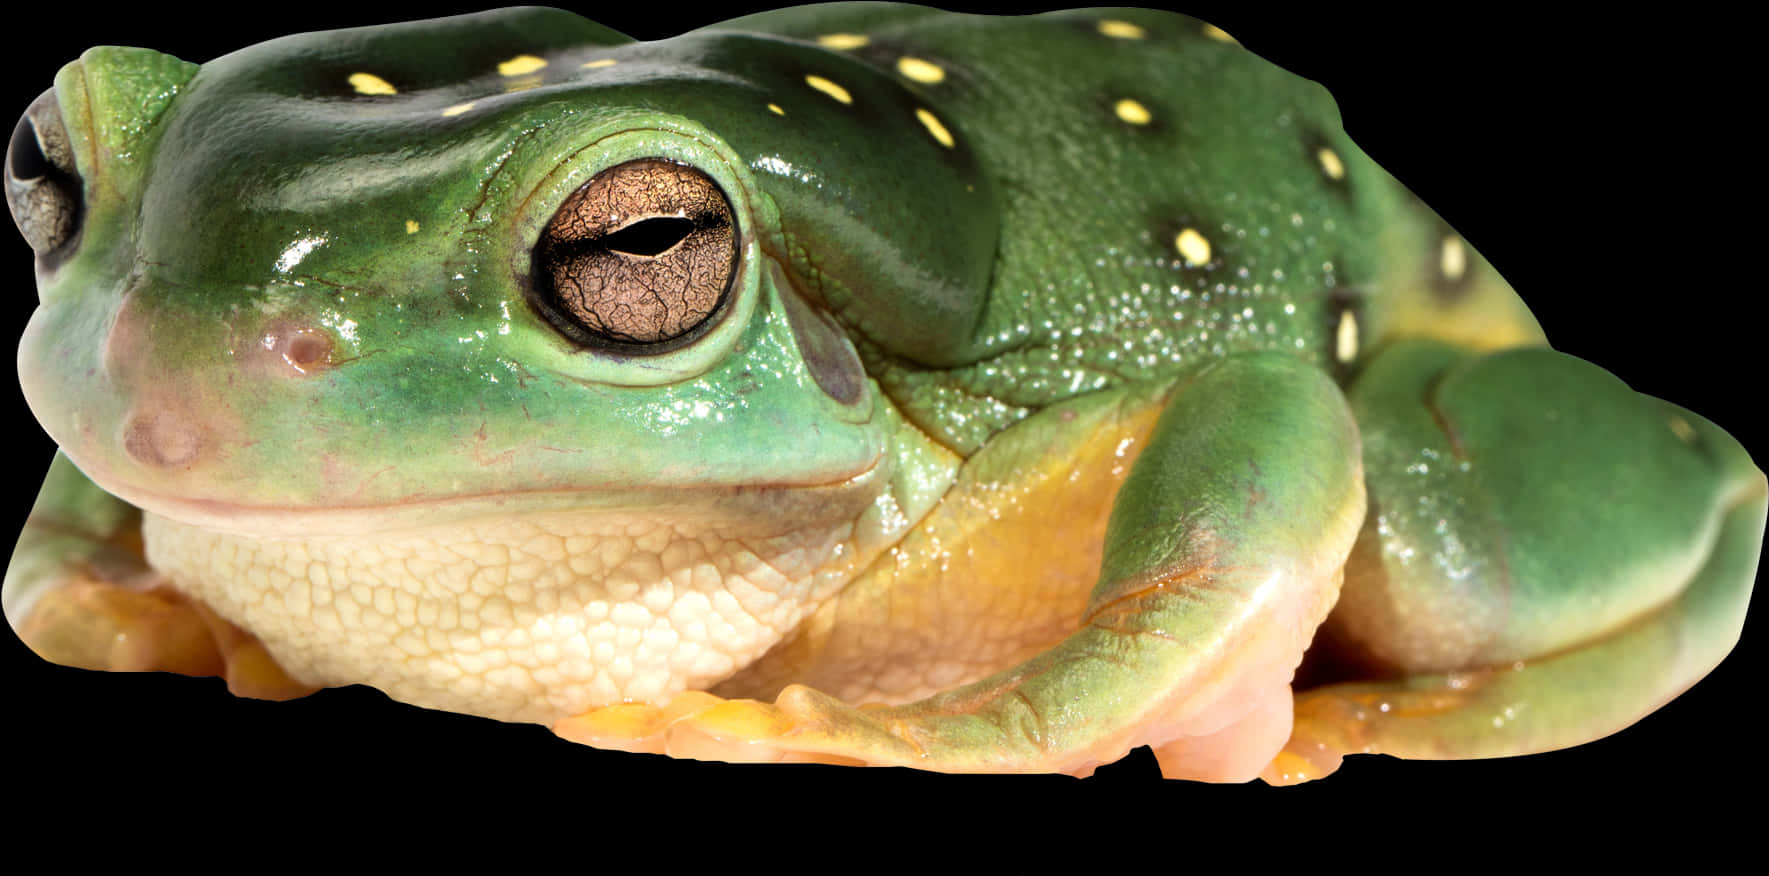 Green Spotted Frog Closeup.jpg